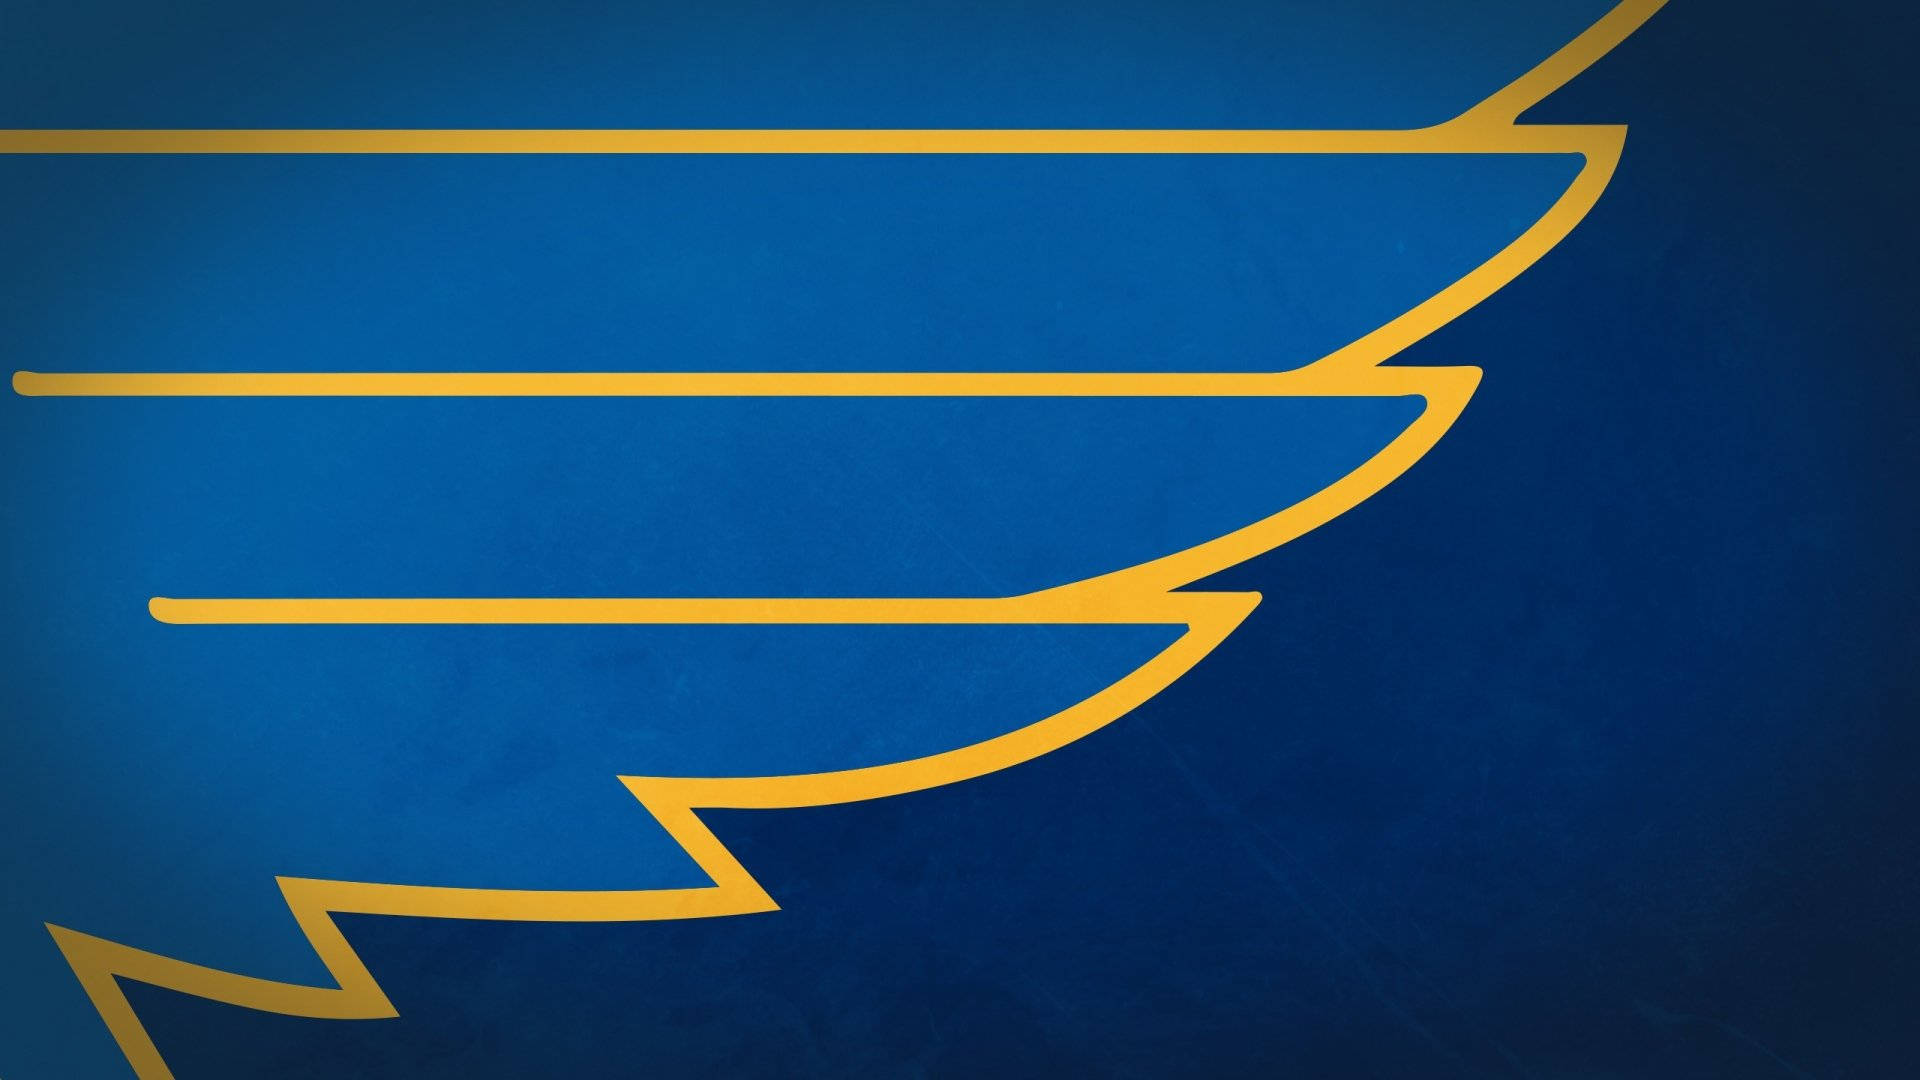 Top 999+ St Louis Blues Wallpaper Full HD, 4K✅Free to Use